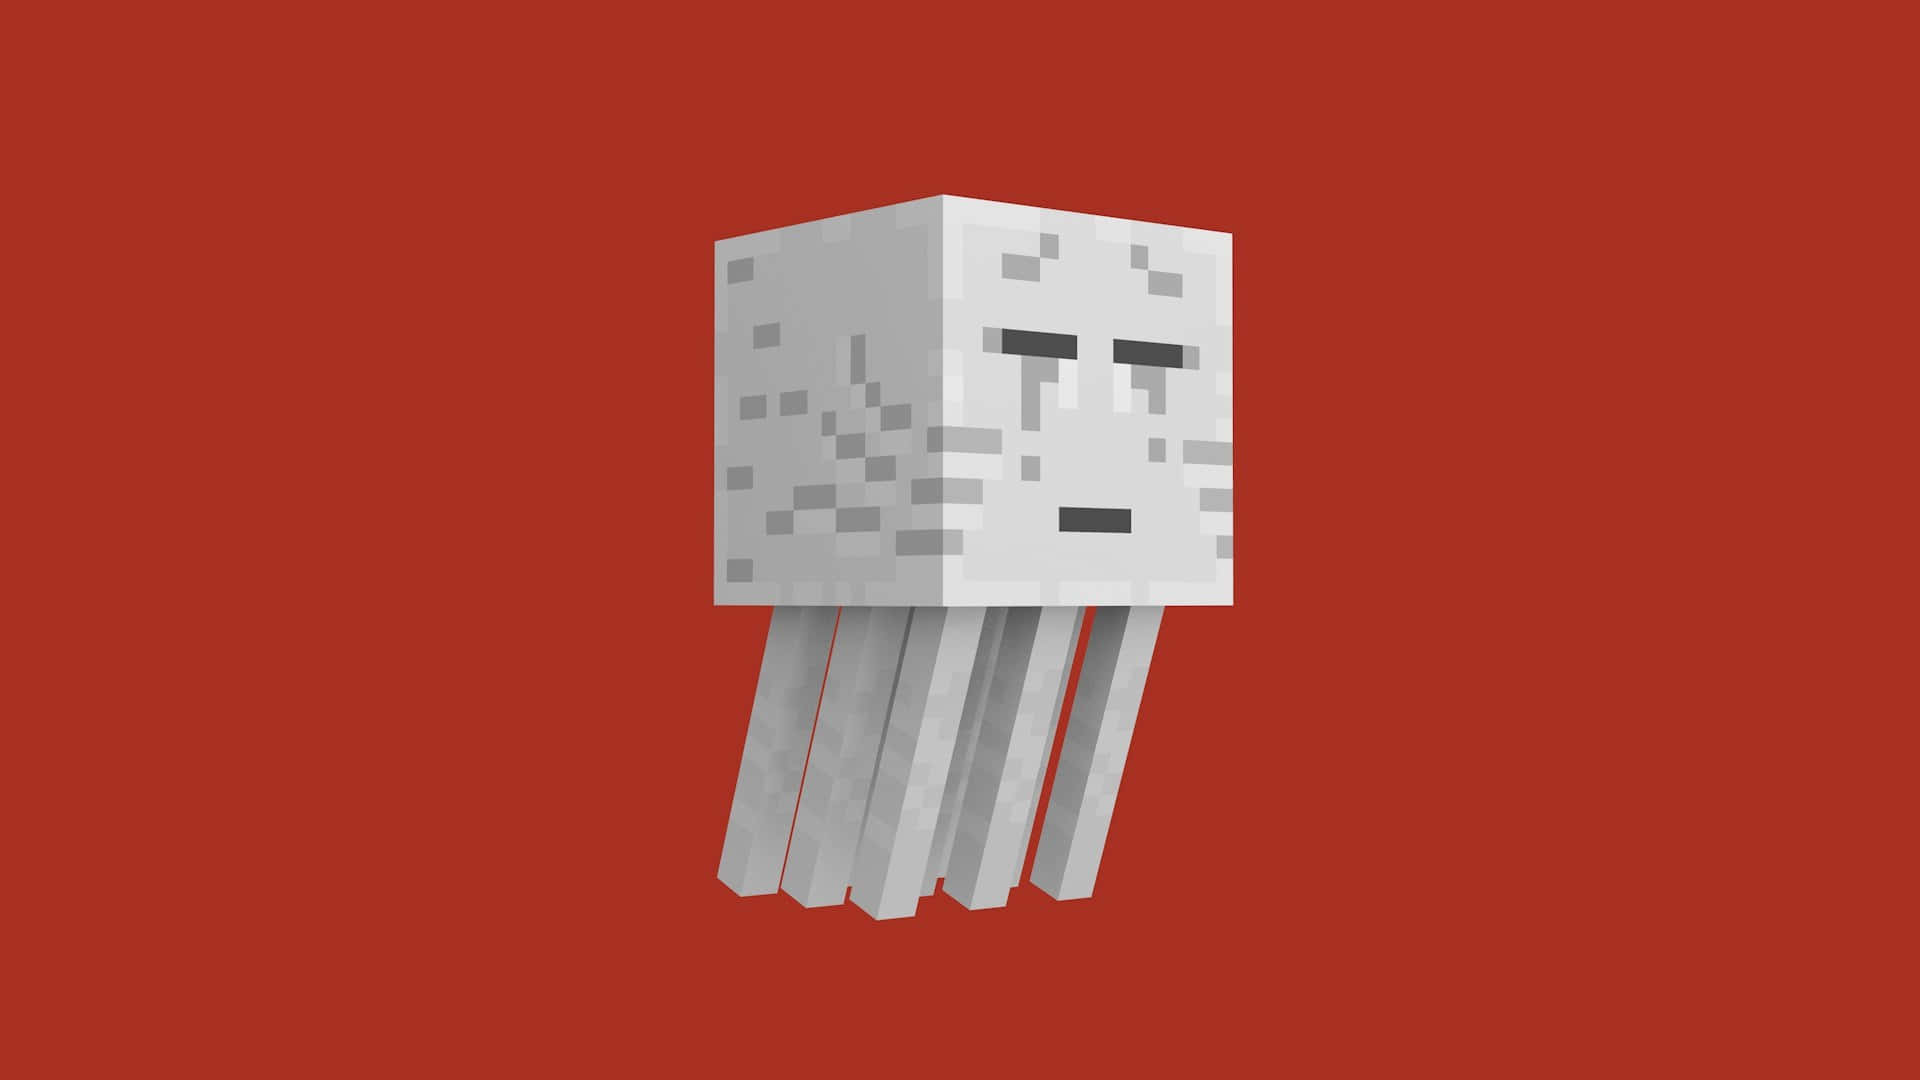 Ghast attacking in the Nether dimension of Minecraft Wallpaper